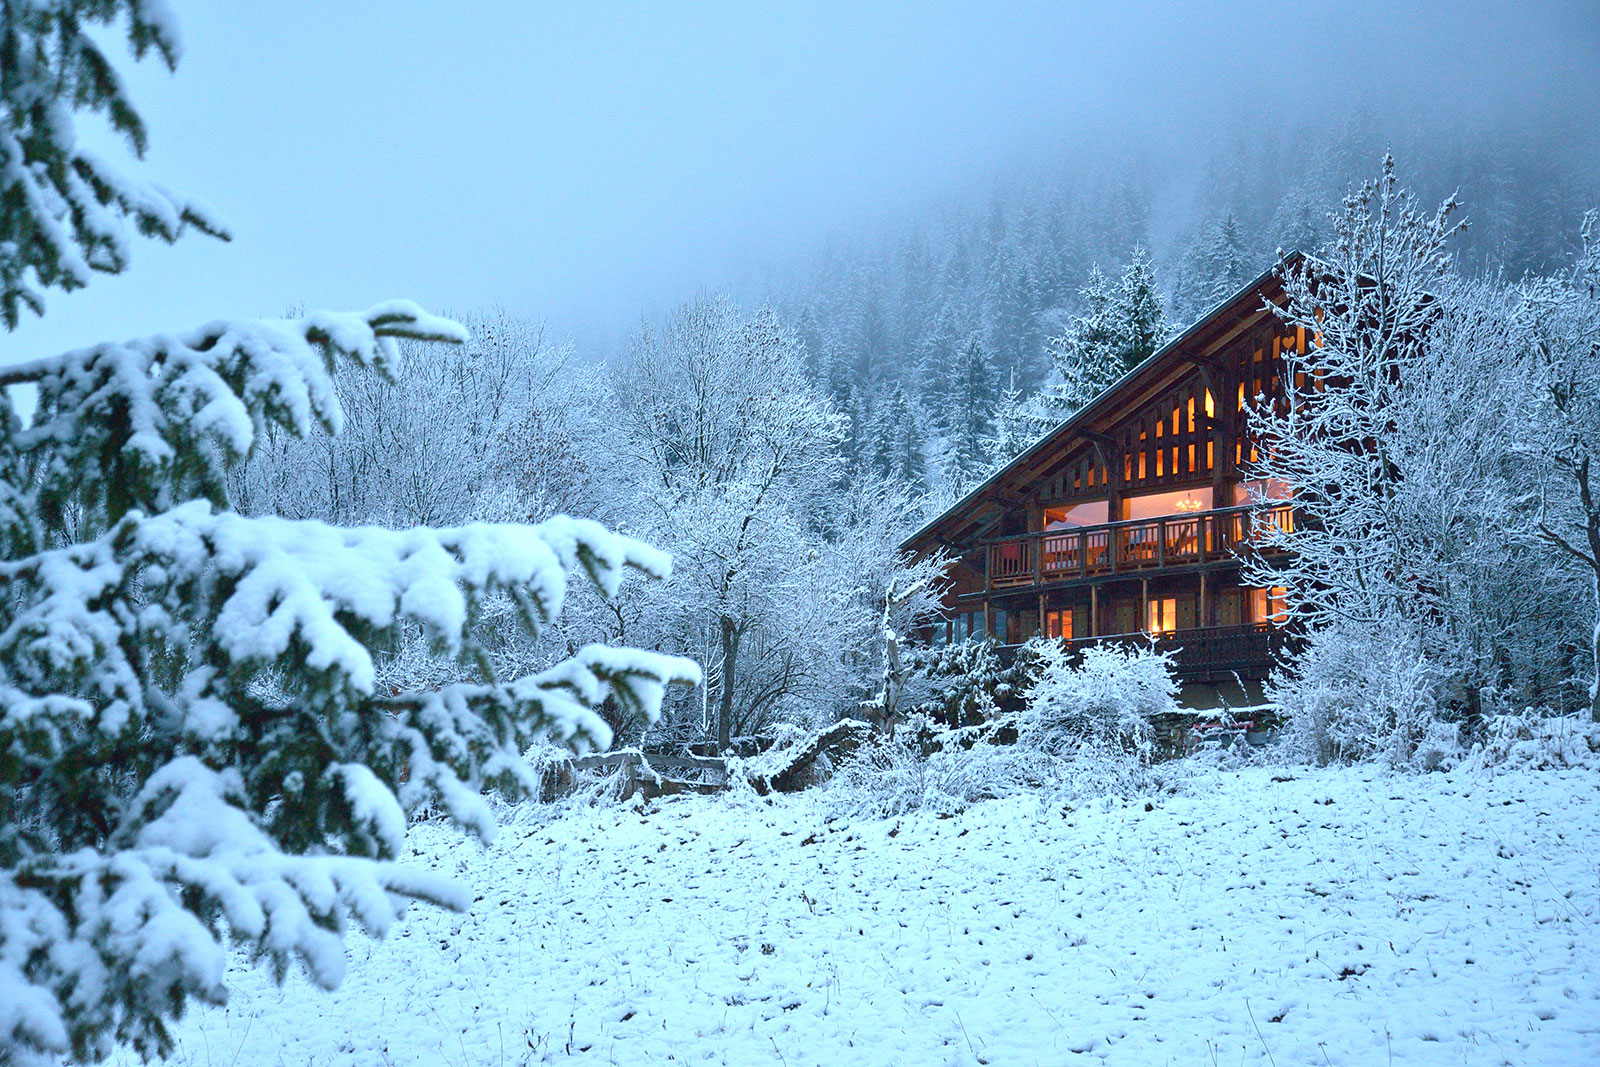 Chalet Cannelle